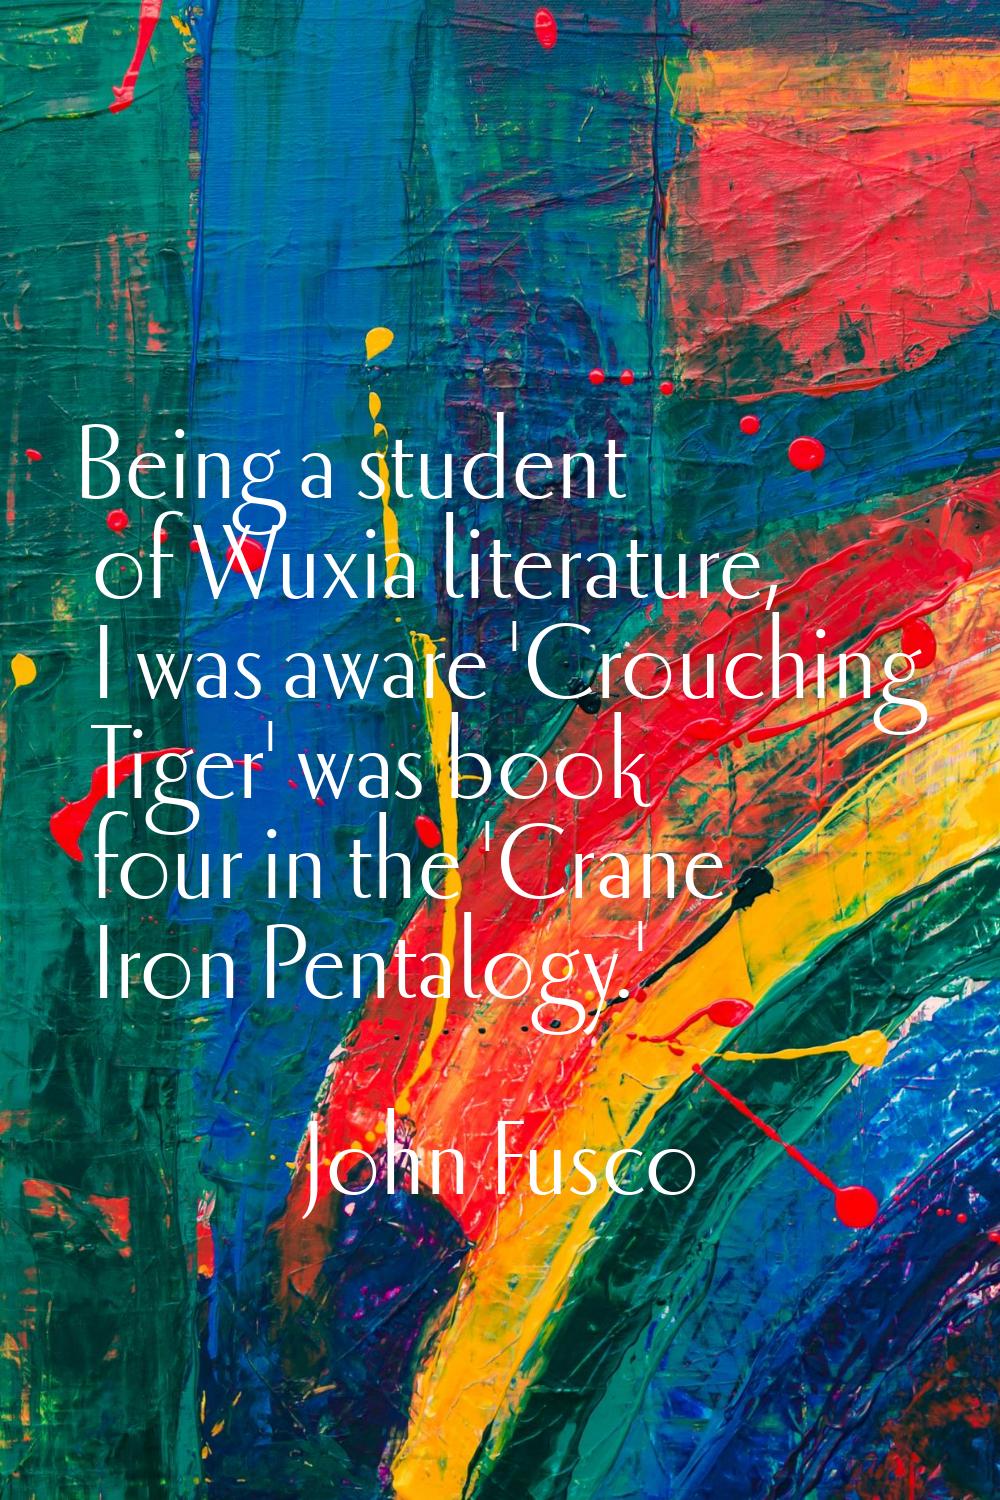 Being a student of Wuxia literature, I was aware 'Crouching Tiger' was book four in the 'Crane Iron